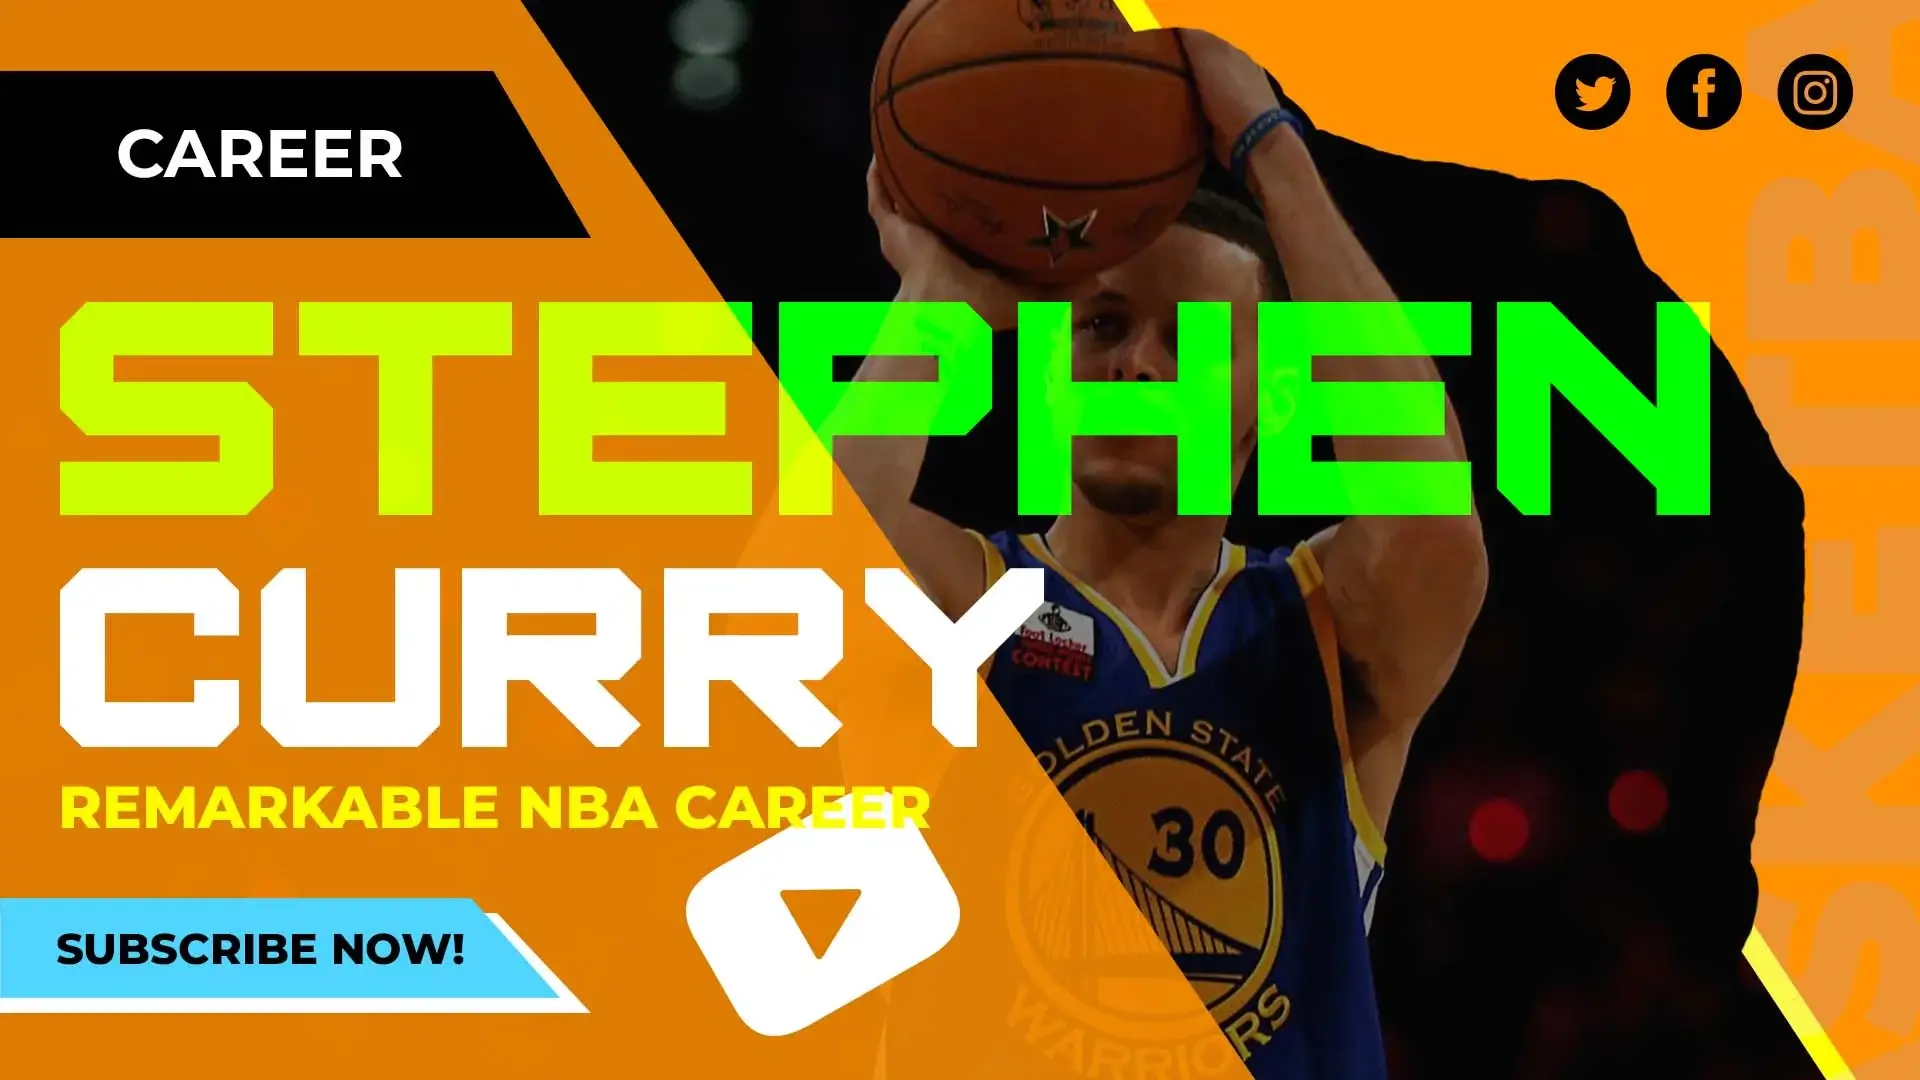 Stephen Curry’s Remarkable NBA Career